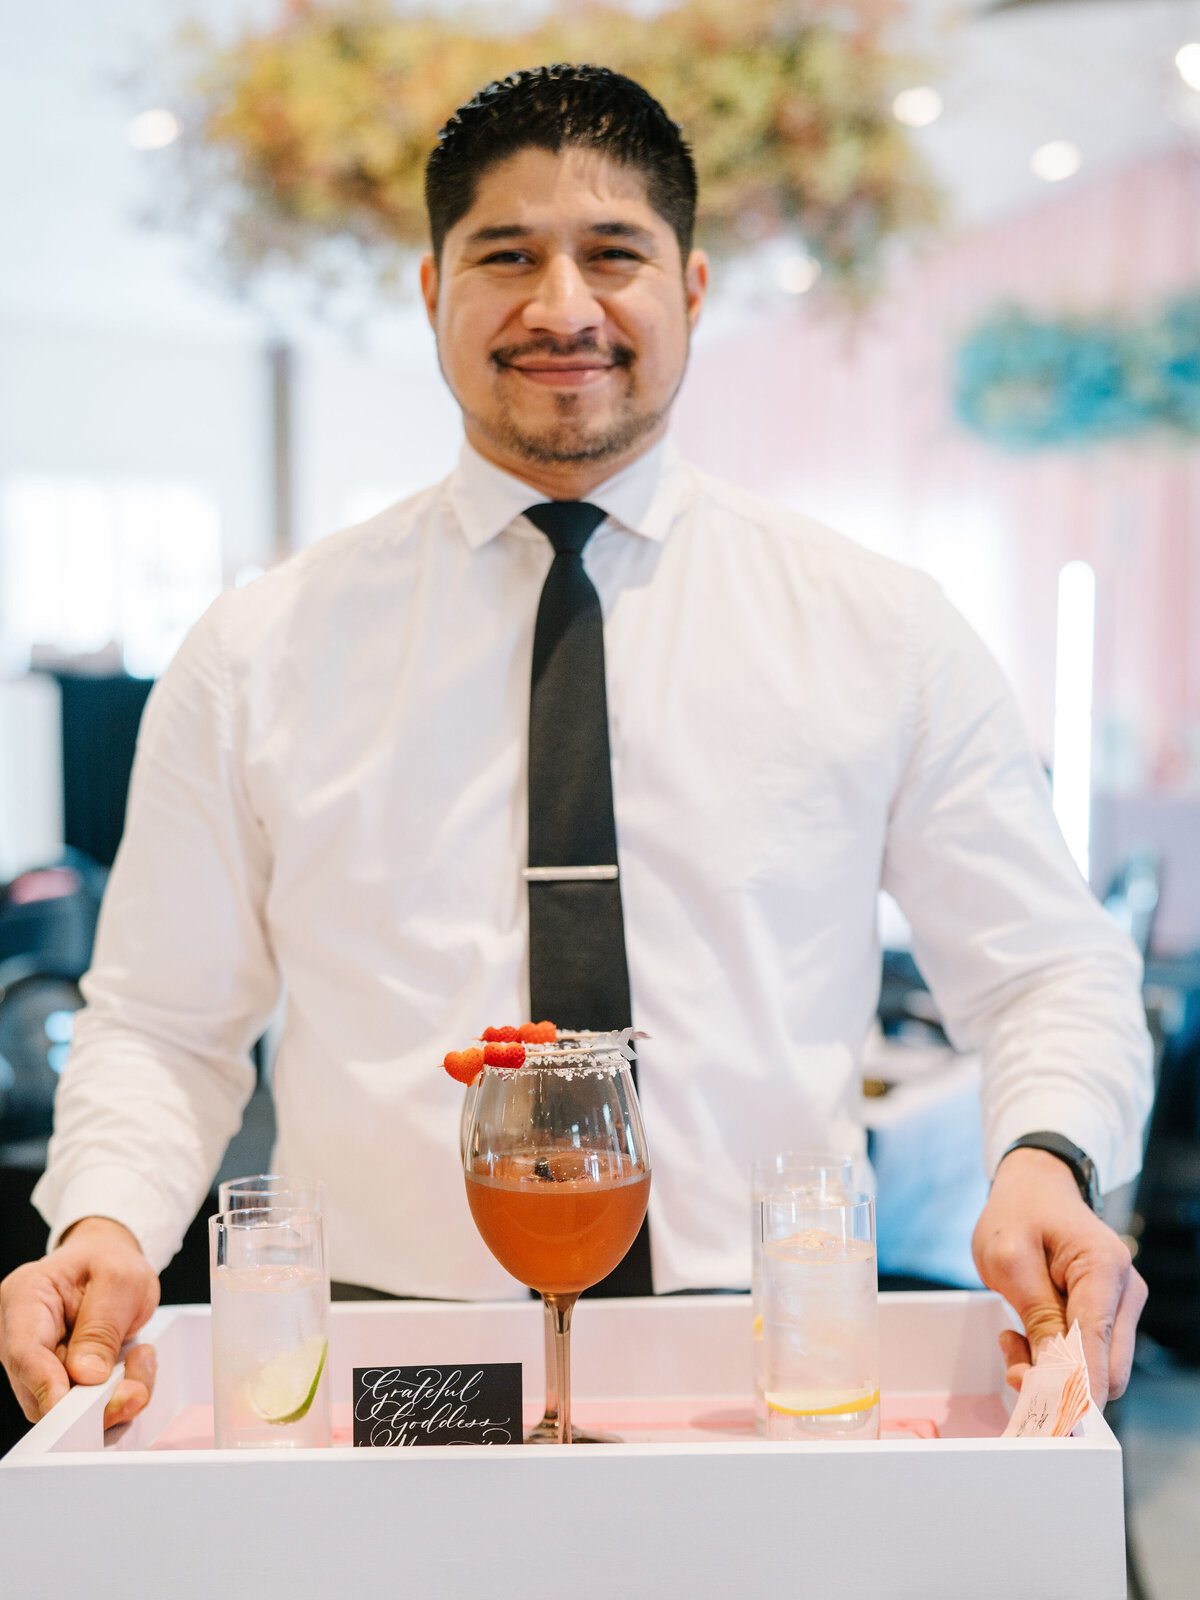 Bartender holding the tray with the drinks and the custom sign calligraphy